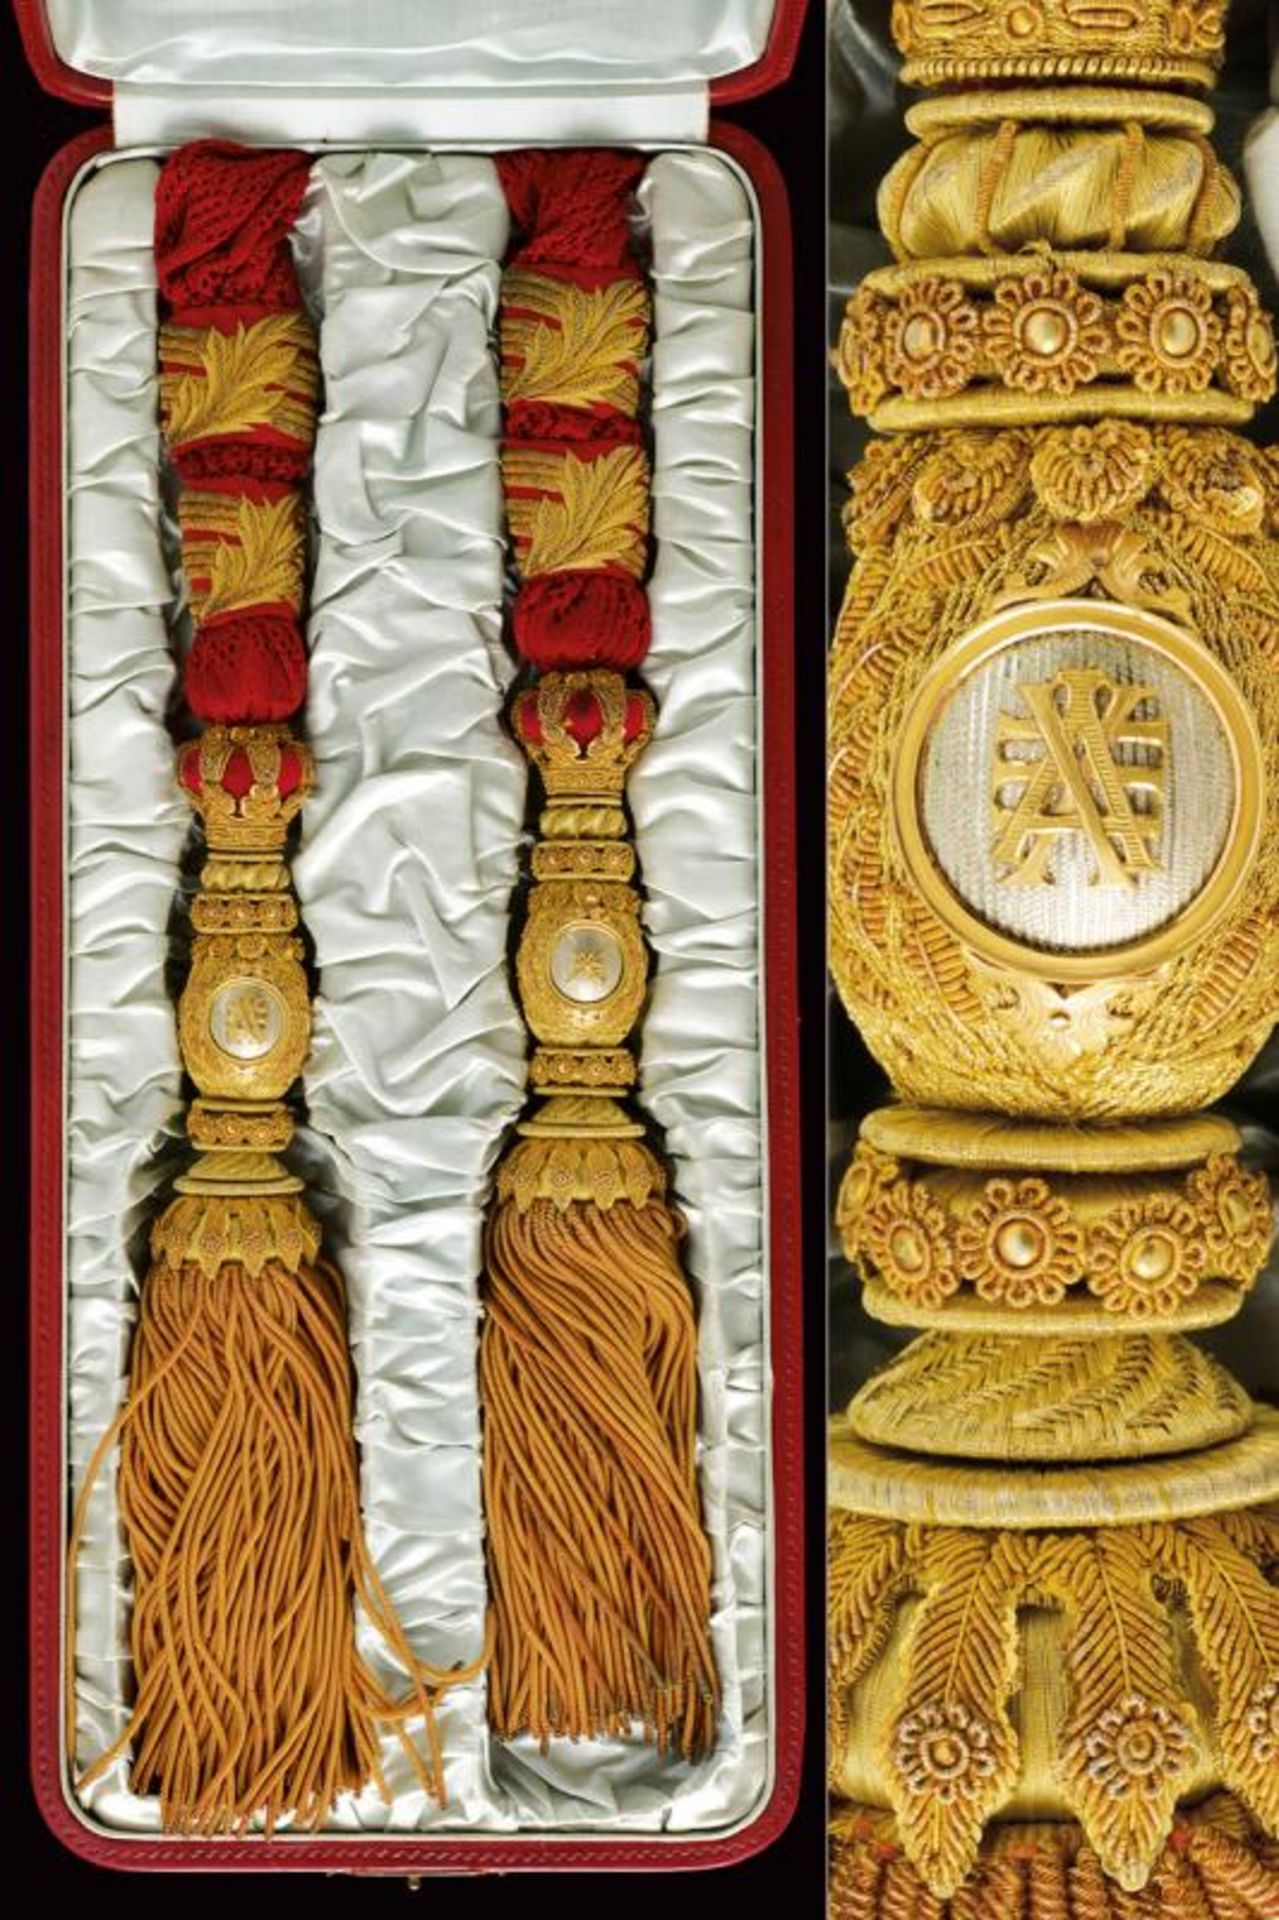 A general's sash from the property of Agustin Luque y Coca